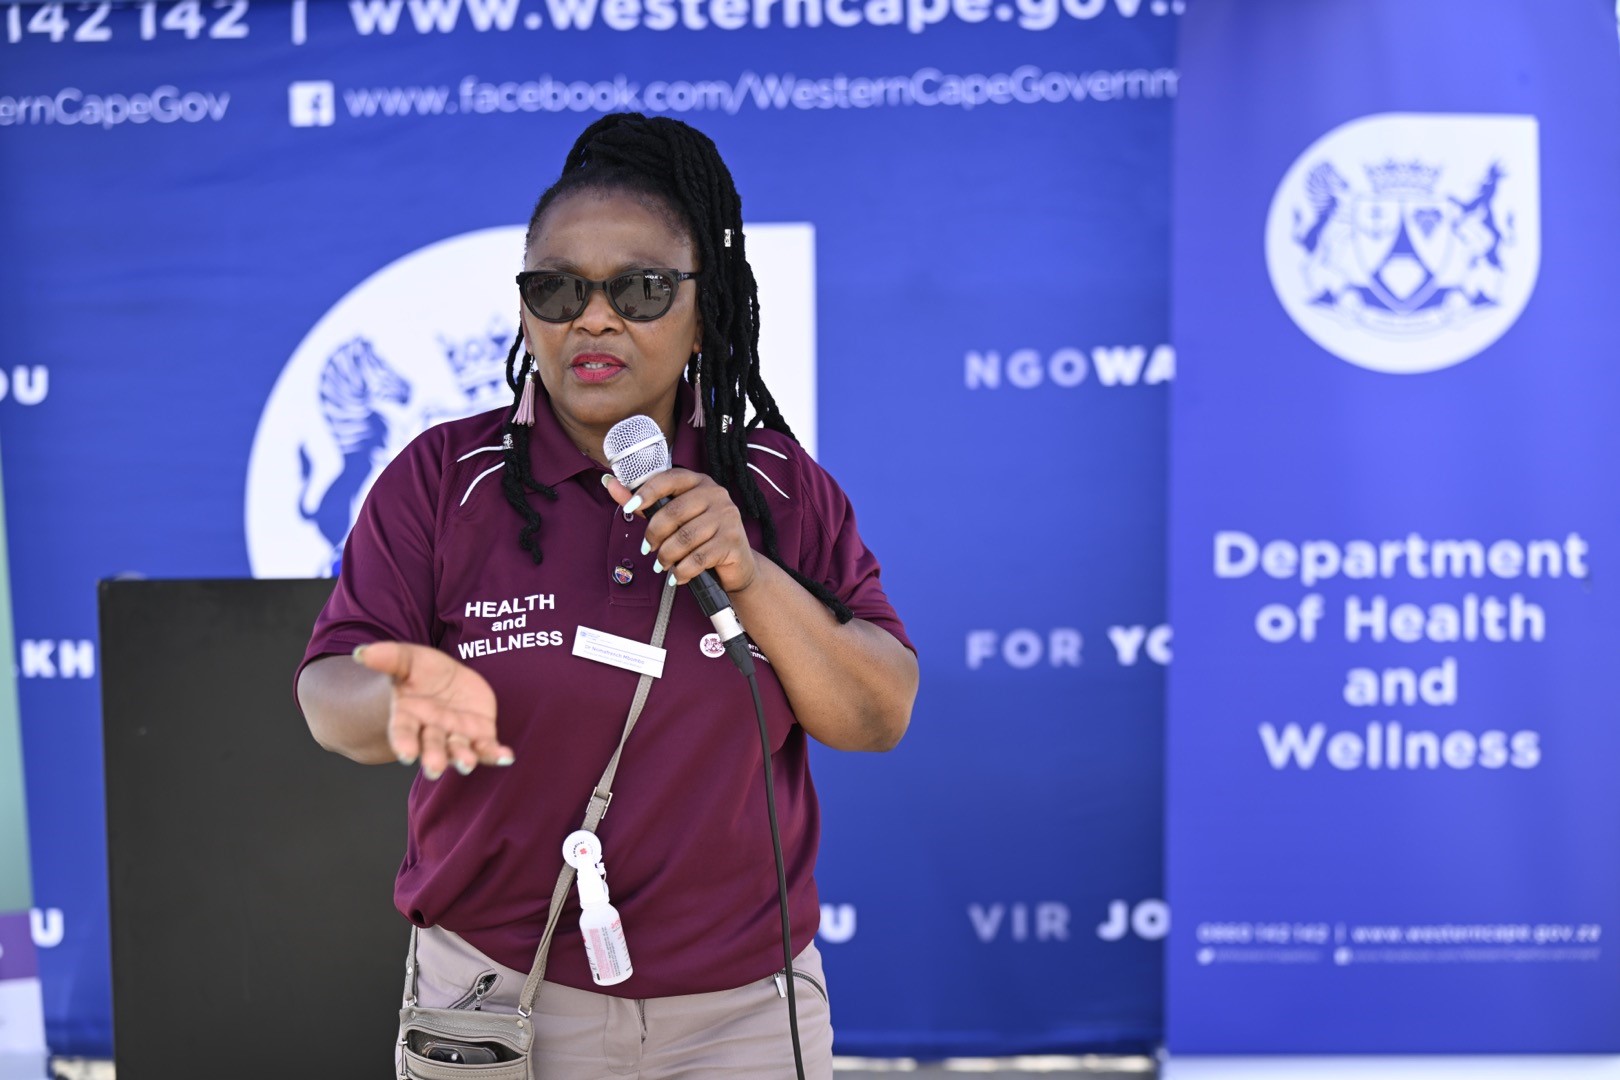 Dr Nomafrench Mbombo, Western Cape Minister of Health and Wellness. 